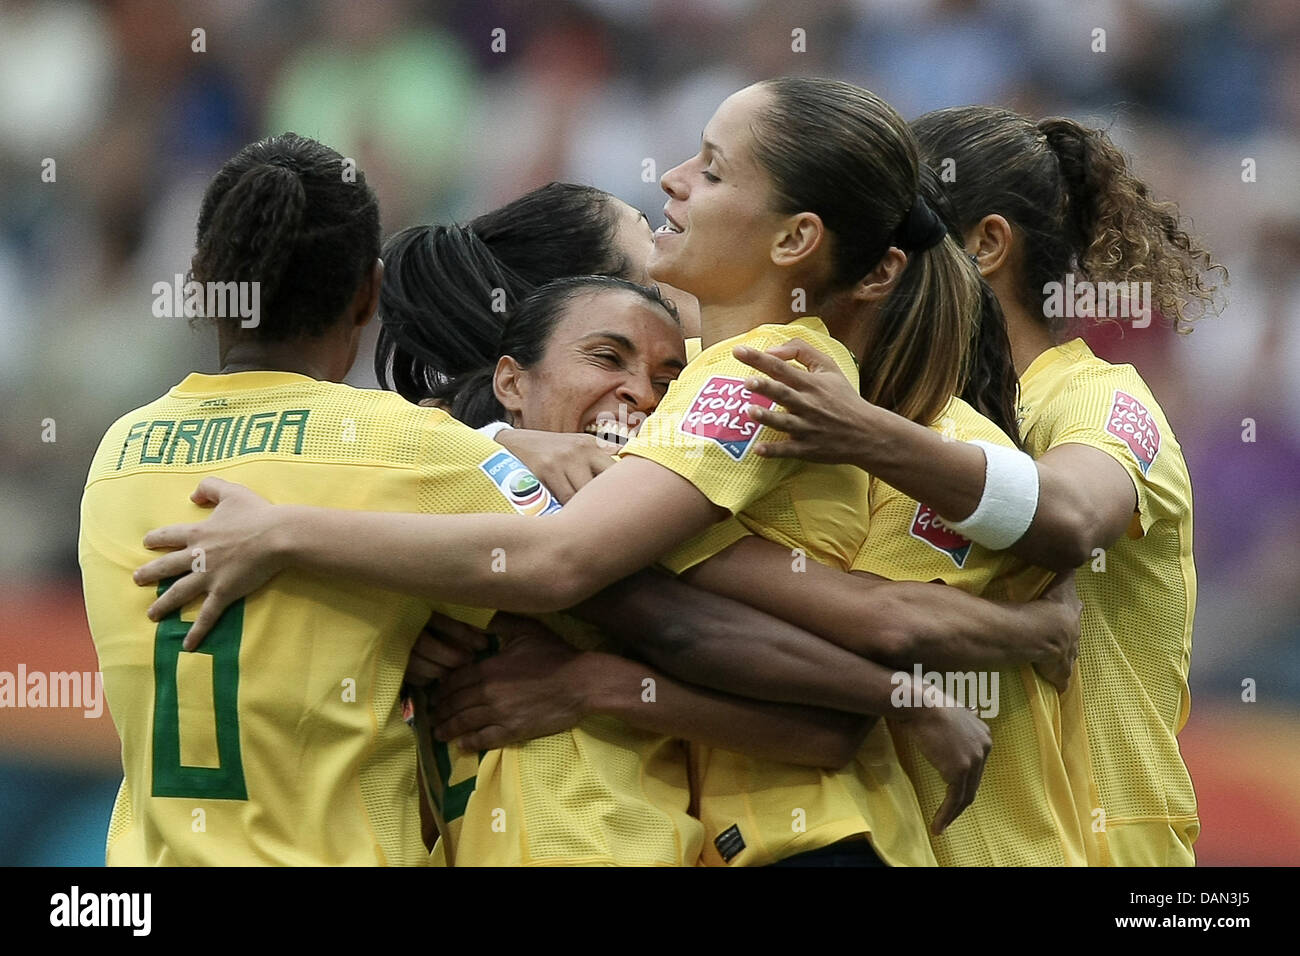 Erika (2nd R) of Brazil celebrates with team mates after scoring the 01-1  during the Group D match Equatorial Guinea against Brazil of FIFA Women's World Cup soccer tournament at the FIFA Women's World Cup Stadium in Frankfurt, Germany, 06 July 2011. Foto: Fredrik von Erichsen dpa/lhe  +++(c) dpa - Bildfunk+++ Stock Photo